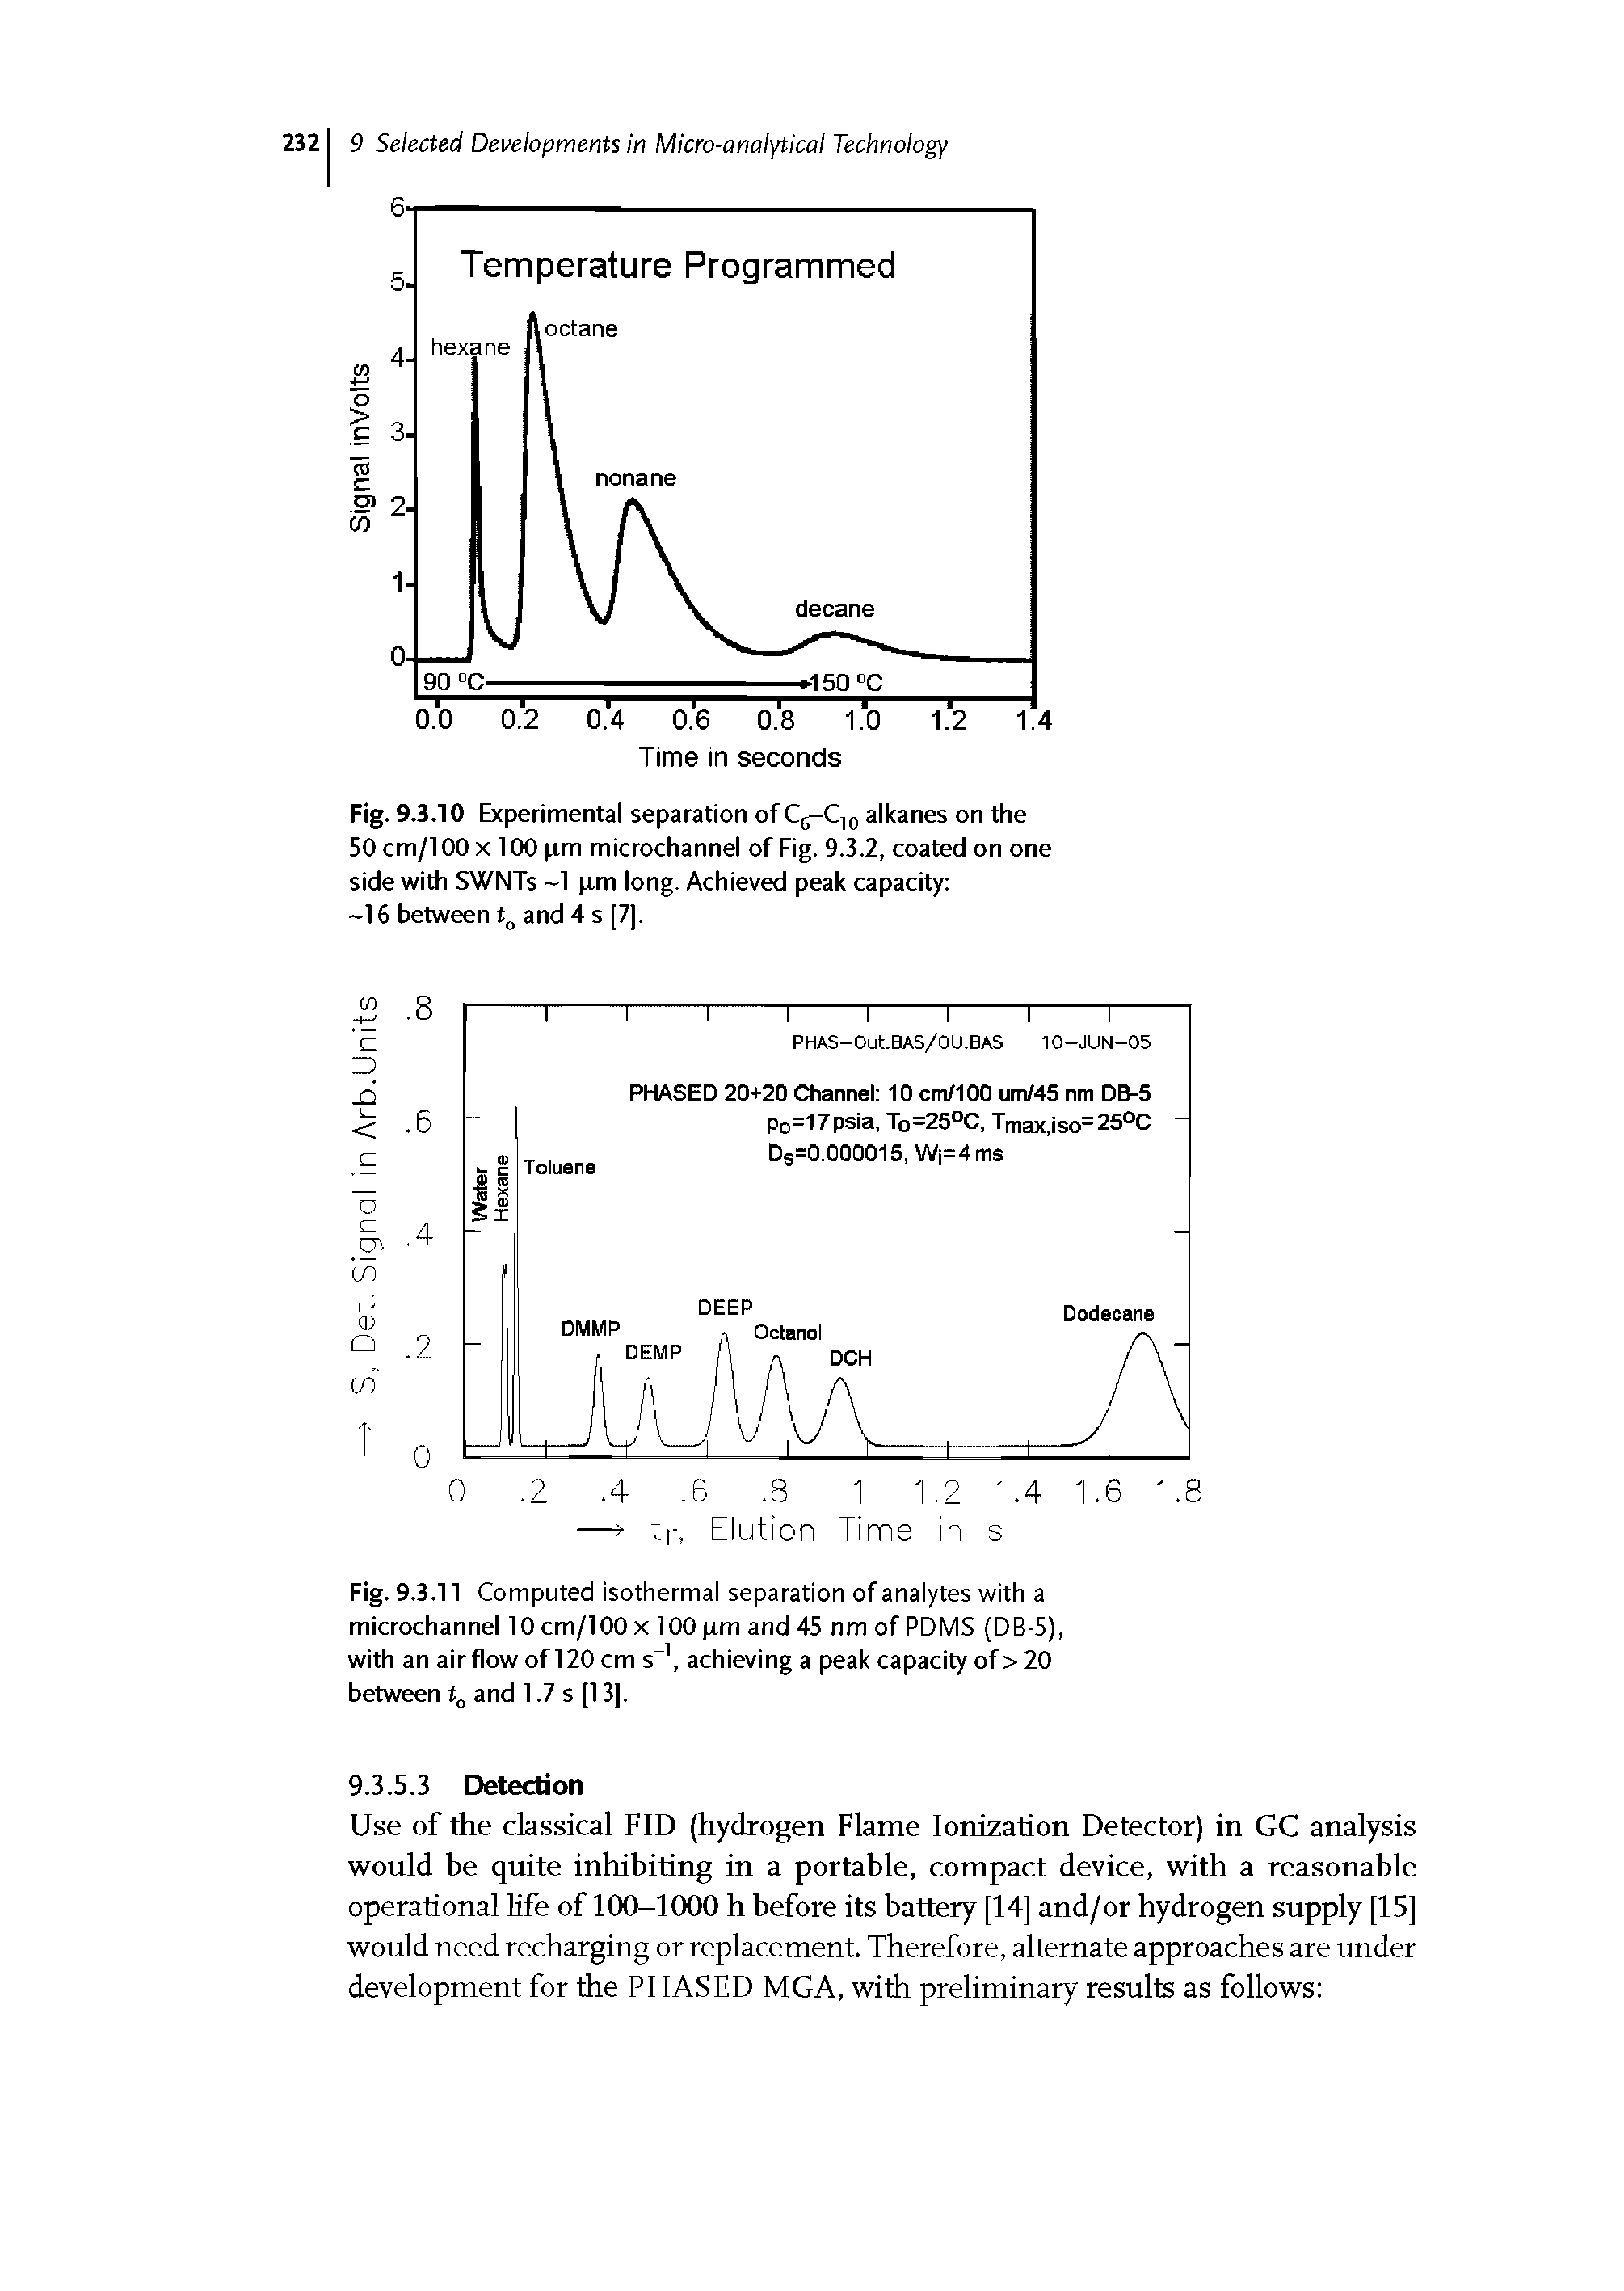 Fig. 9.3.11 Computed isothermal separation of analytes with a microchannel 10 cm/100 x 100 pm and 45 nm of PDMS (DB-5), with an airflow of 120 cm s , achieving a peak capacity of > 20 between and 1.7 s [13].